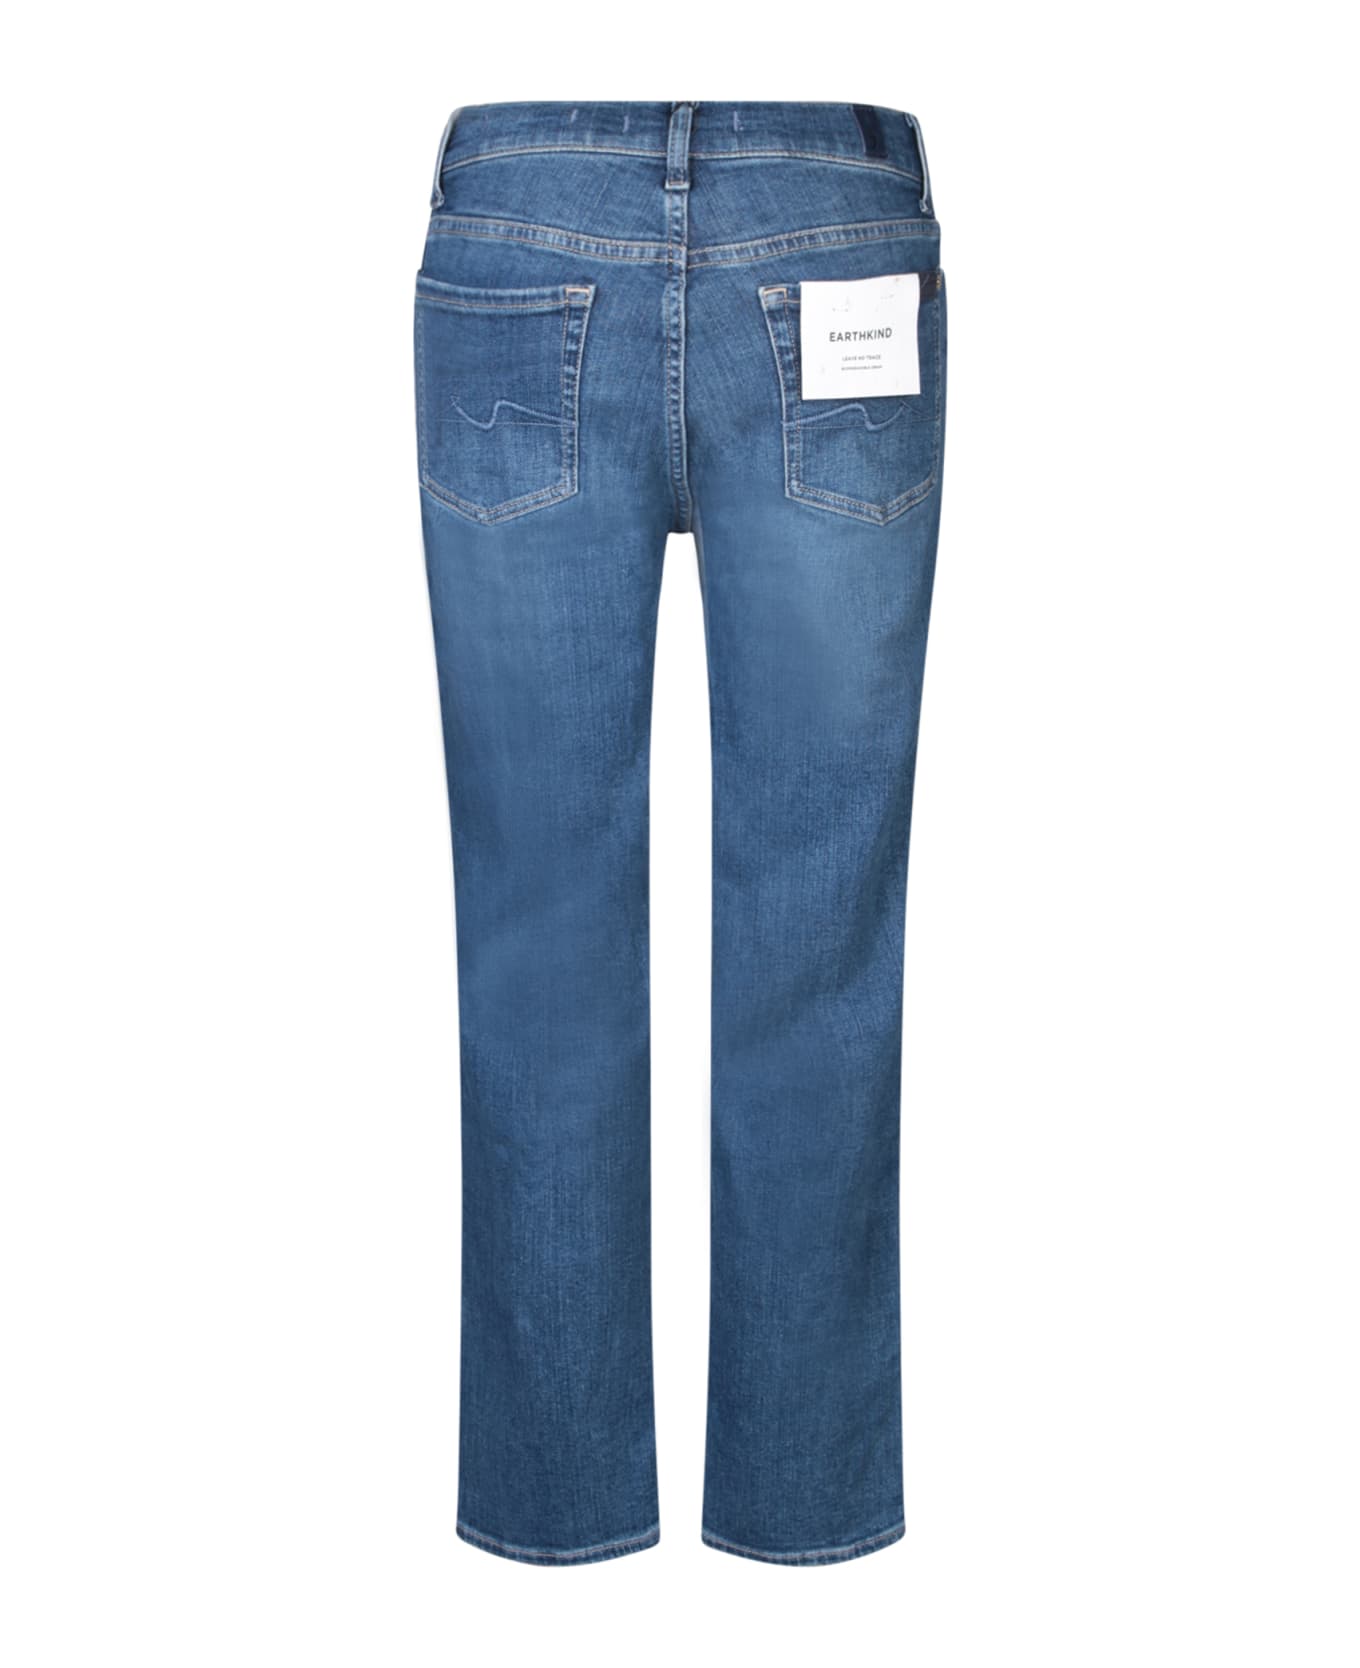 7 For All Mankind Straight Crop Blue Jeans - Blue デニム